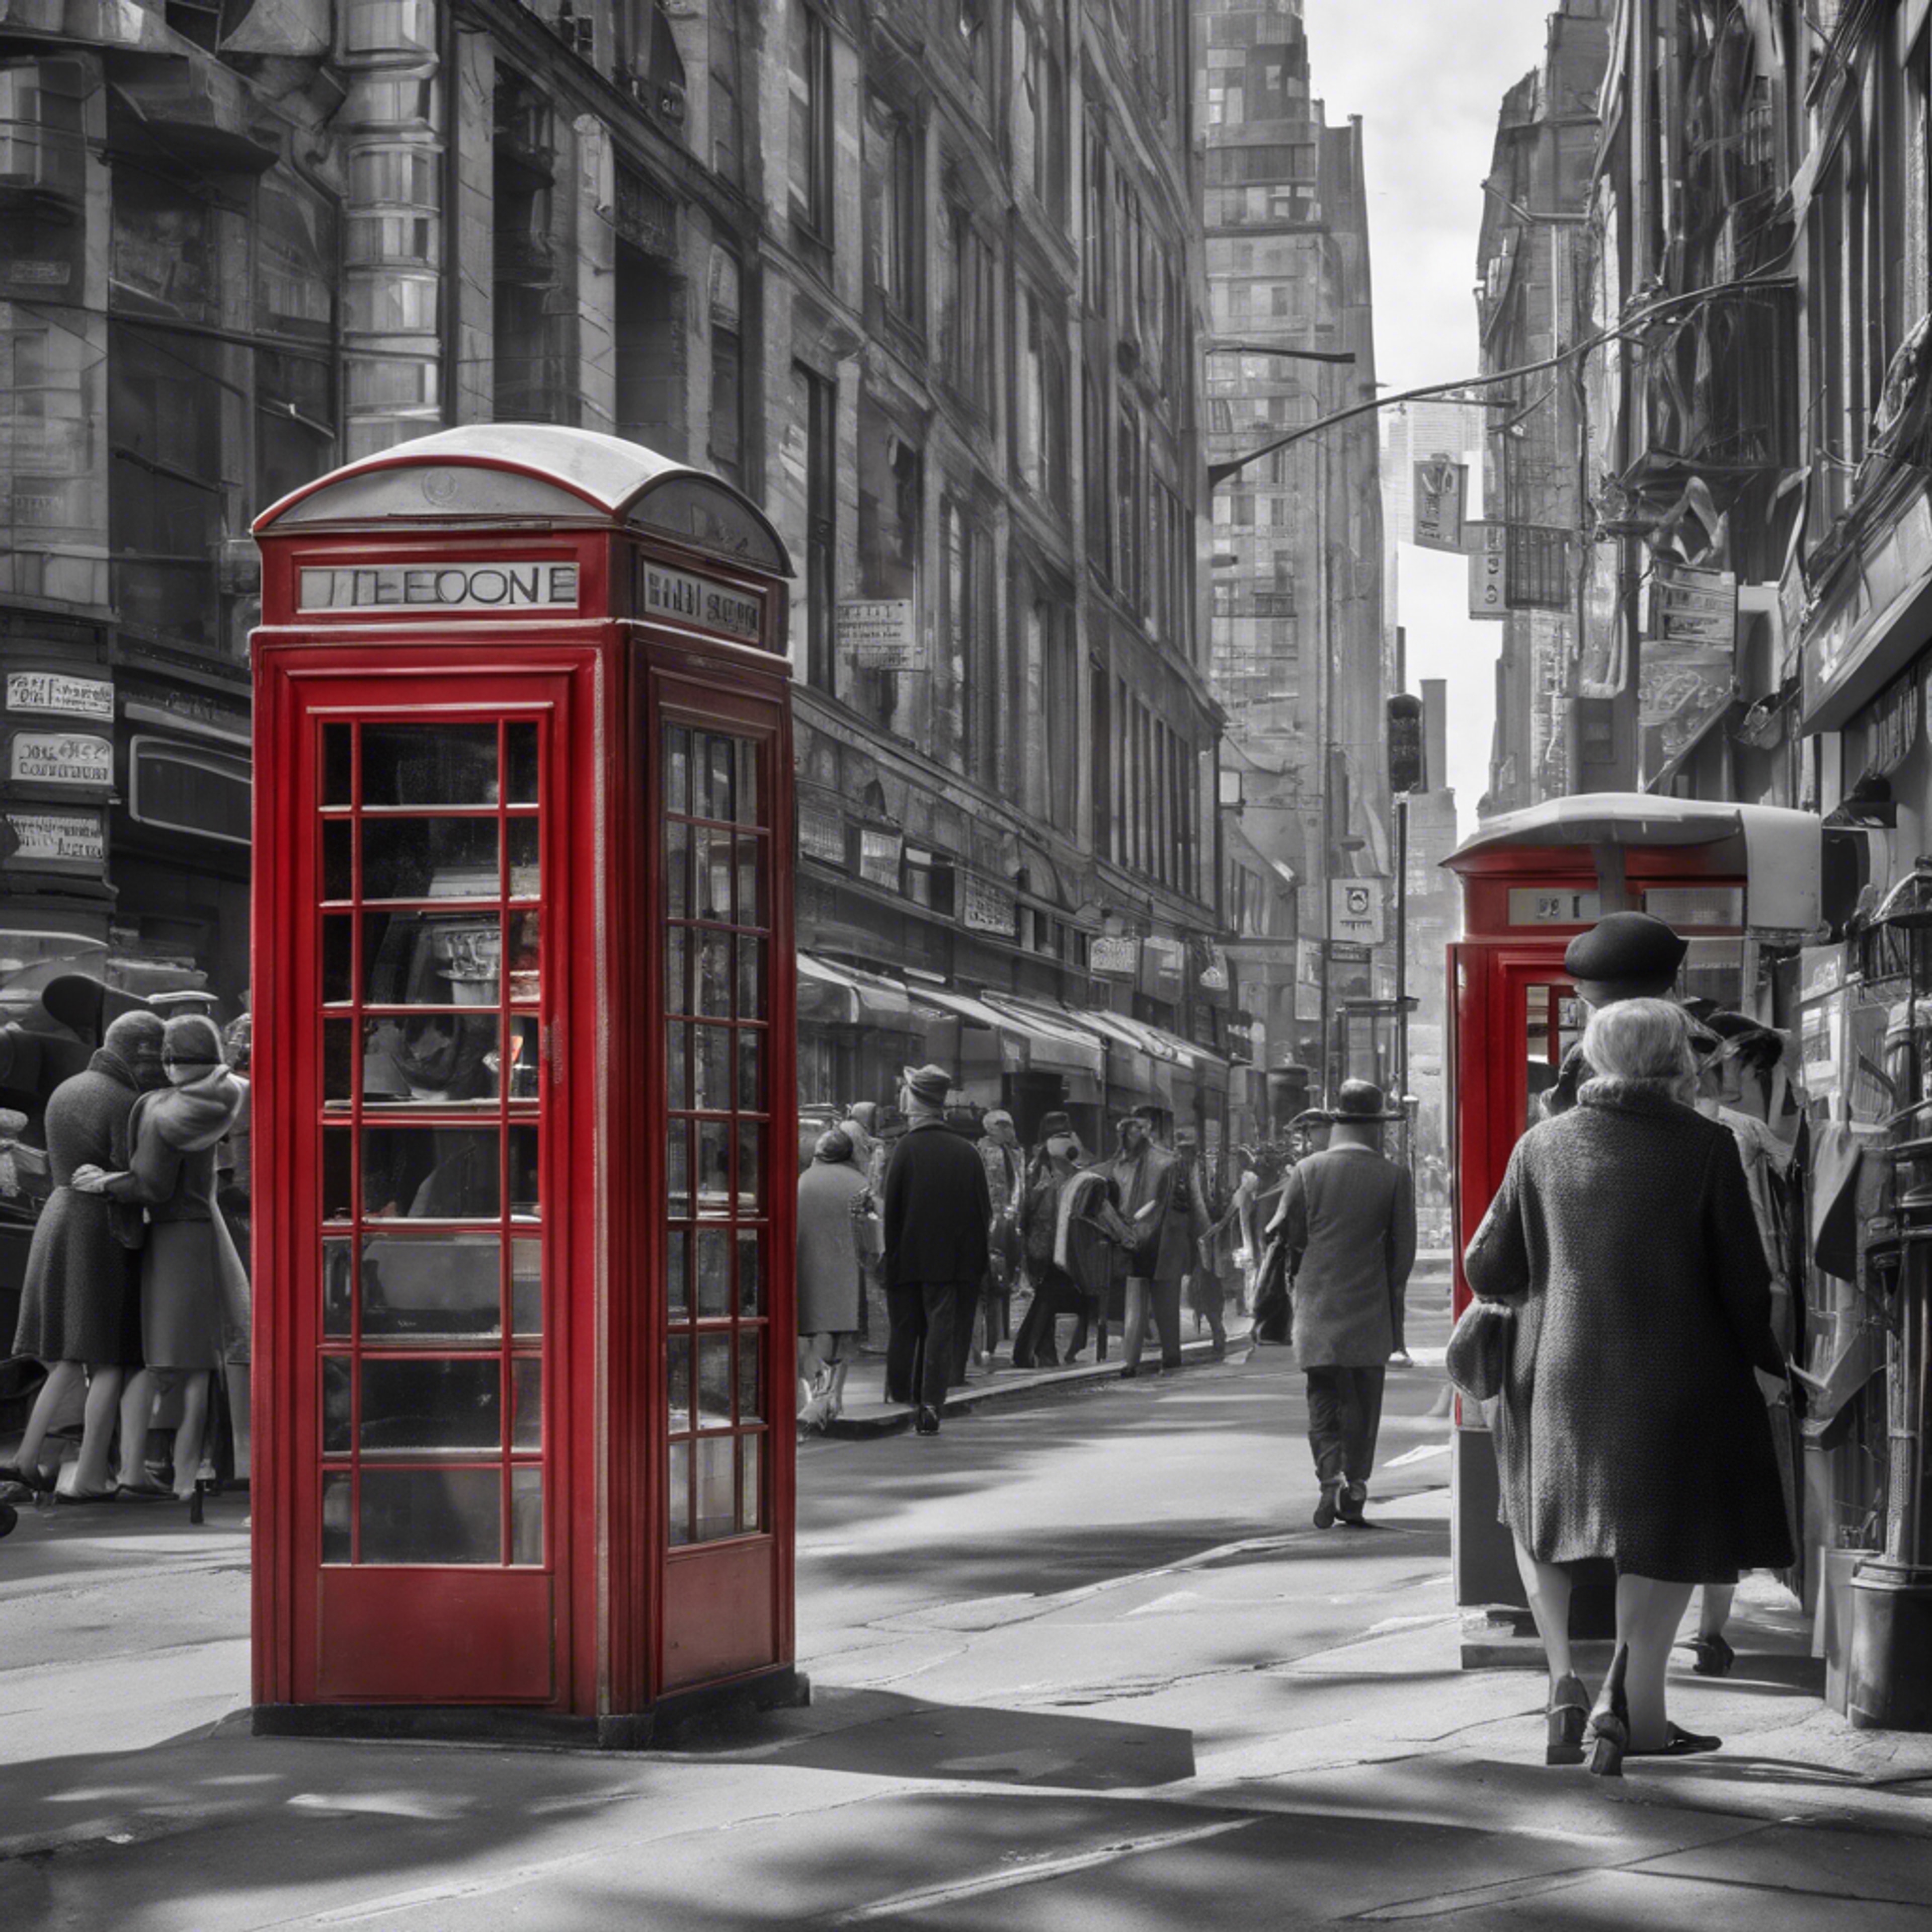 A black and white picture of a busy city street in the 1960s, with one characteristic iconic red phone booth. Tapeet[8cad1b57085c4579b492]